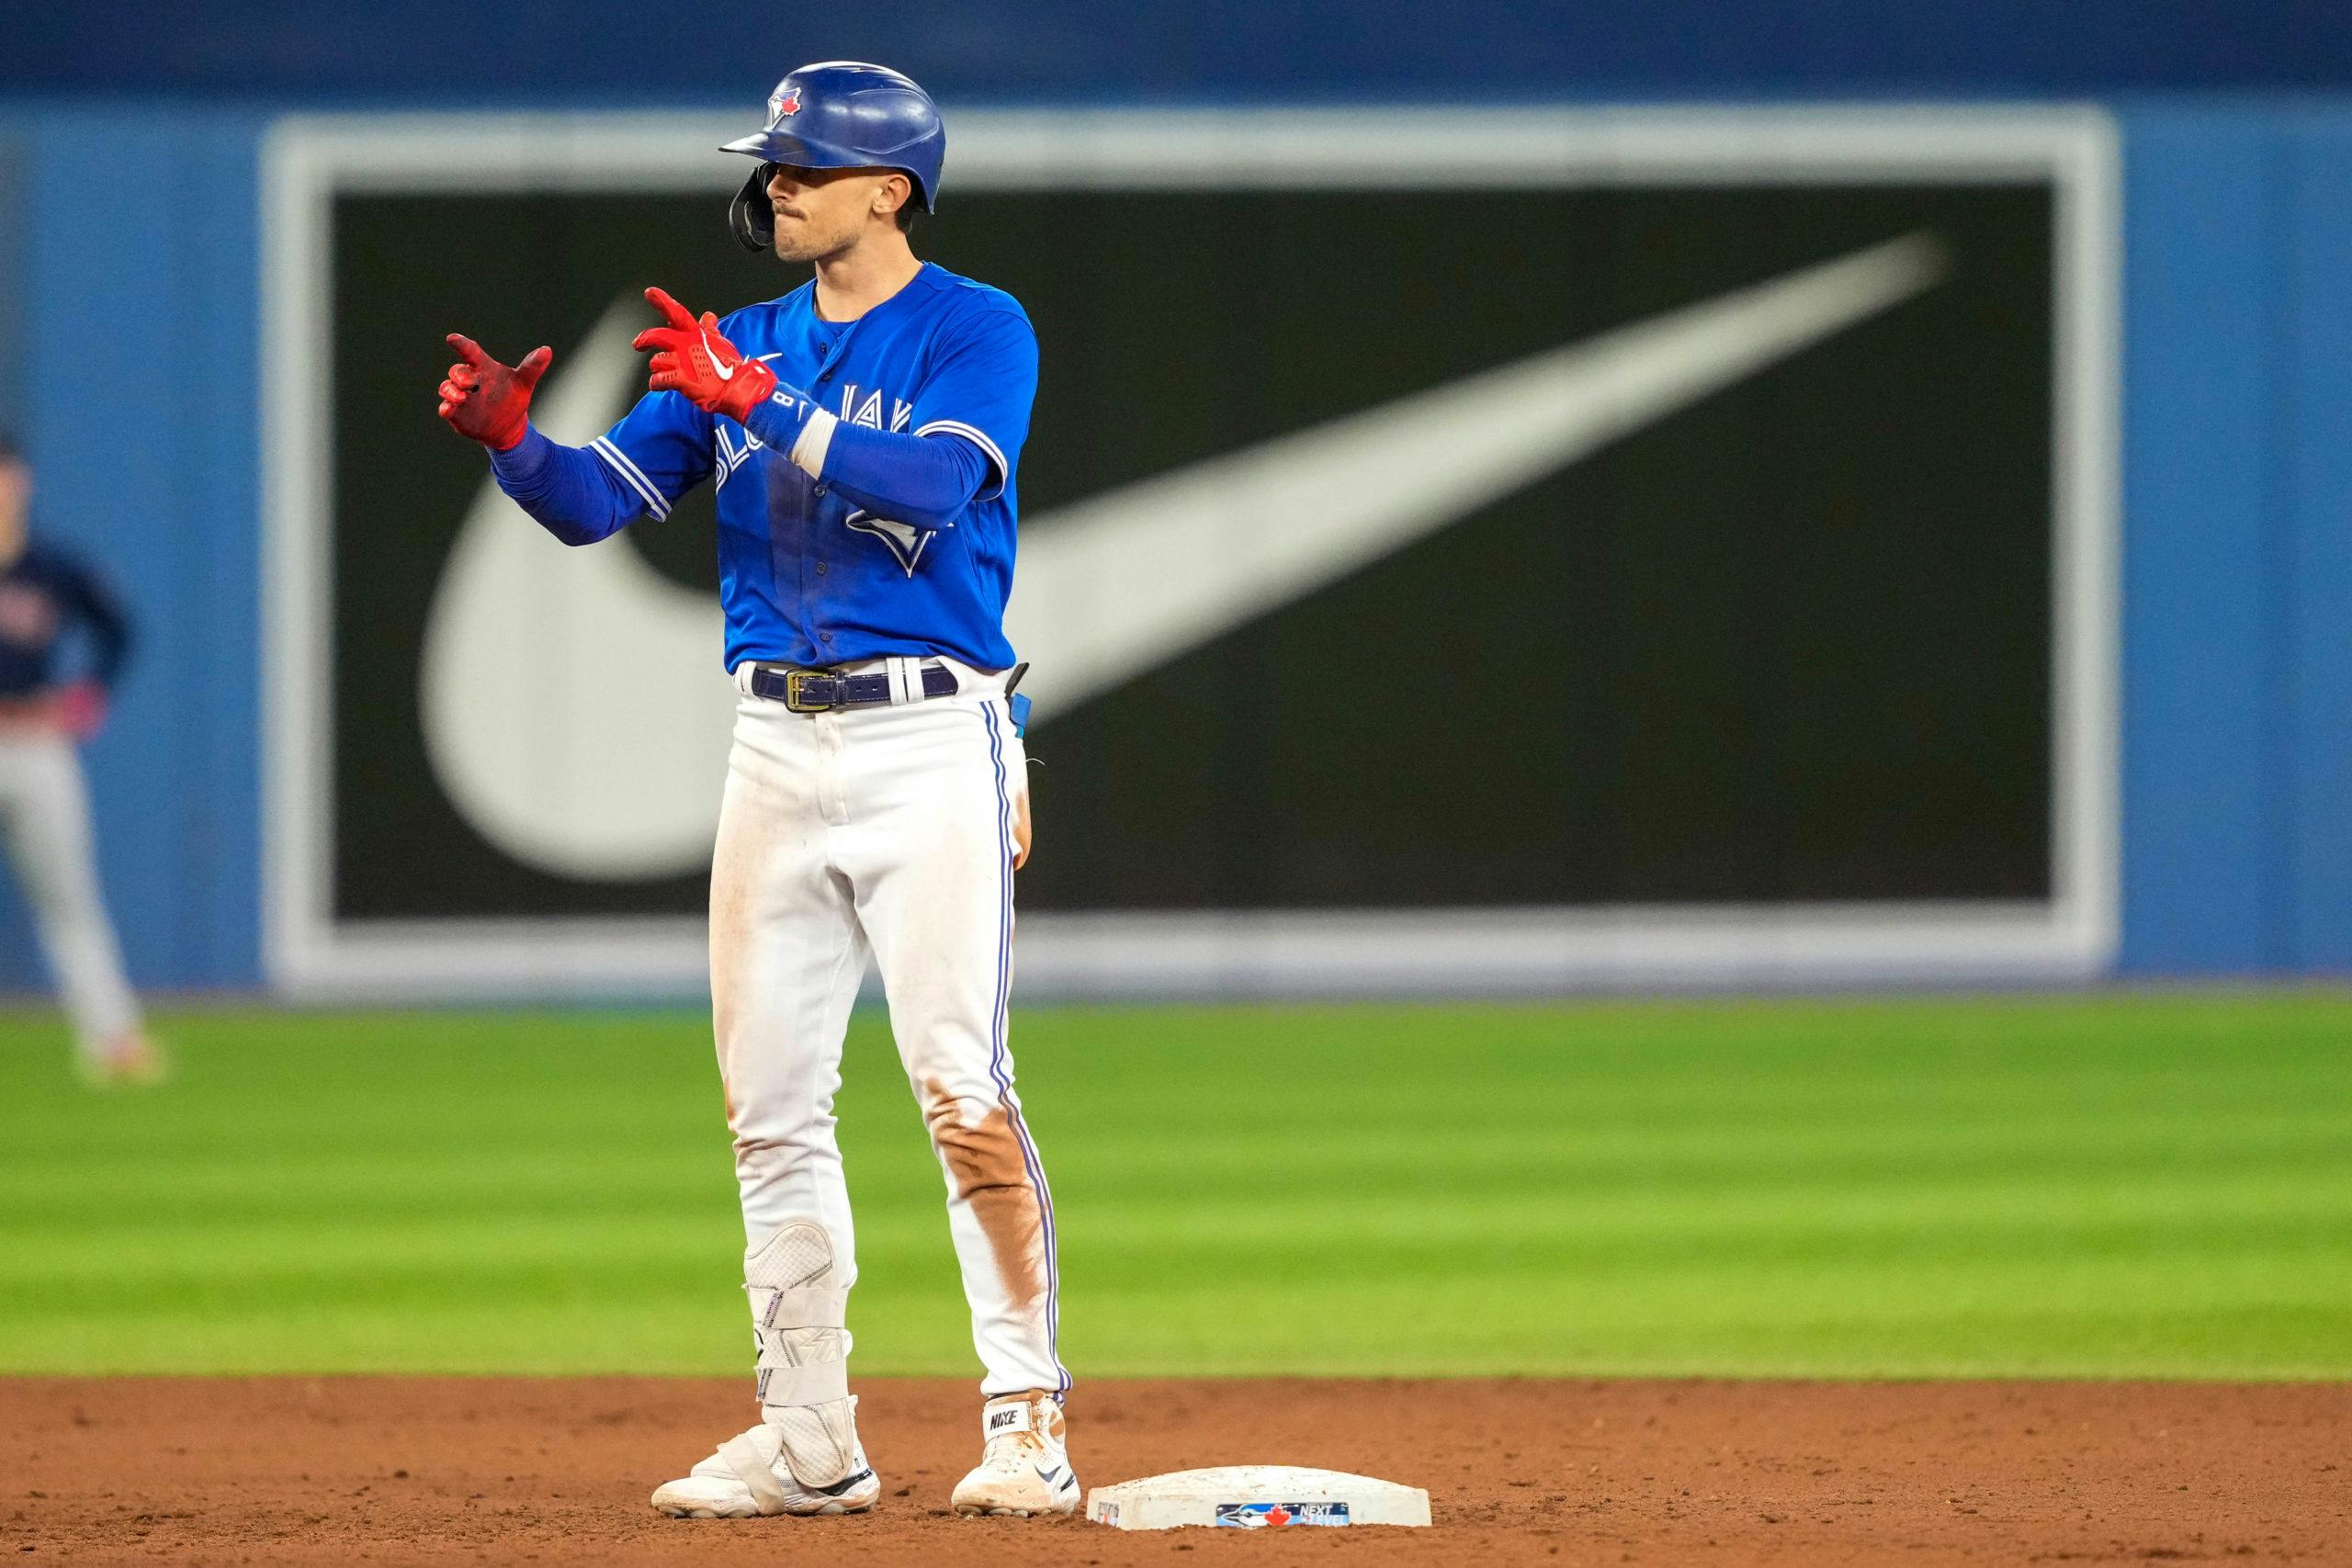 What the new shift rules can do for Cavan Biggio - BlueJaysNation